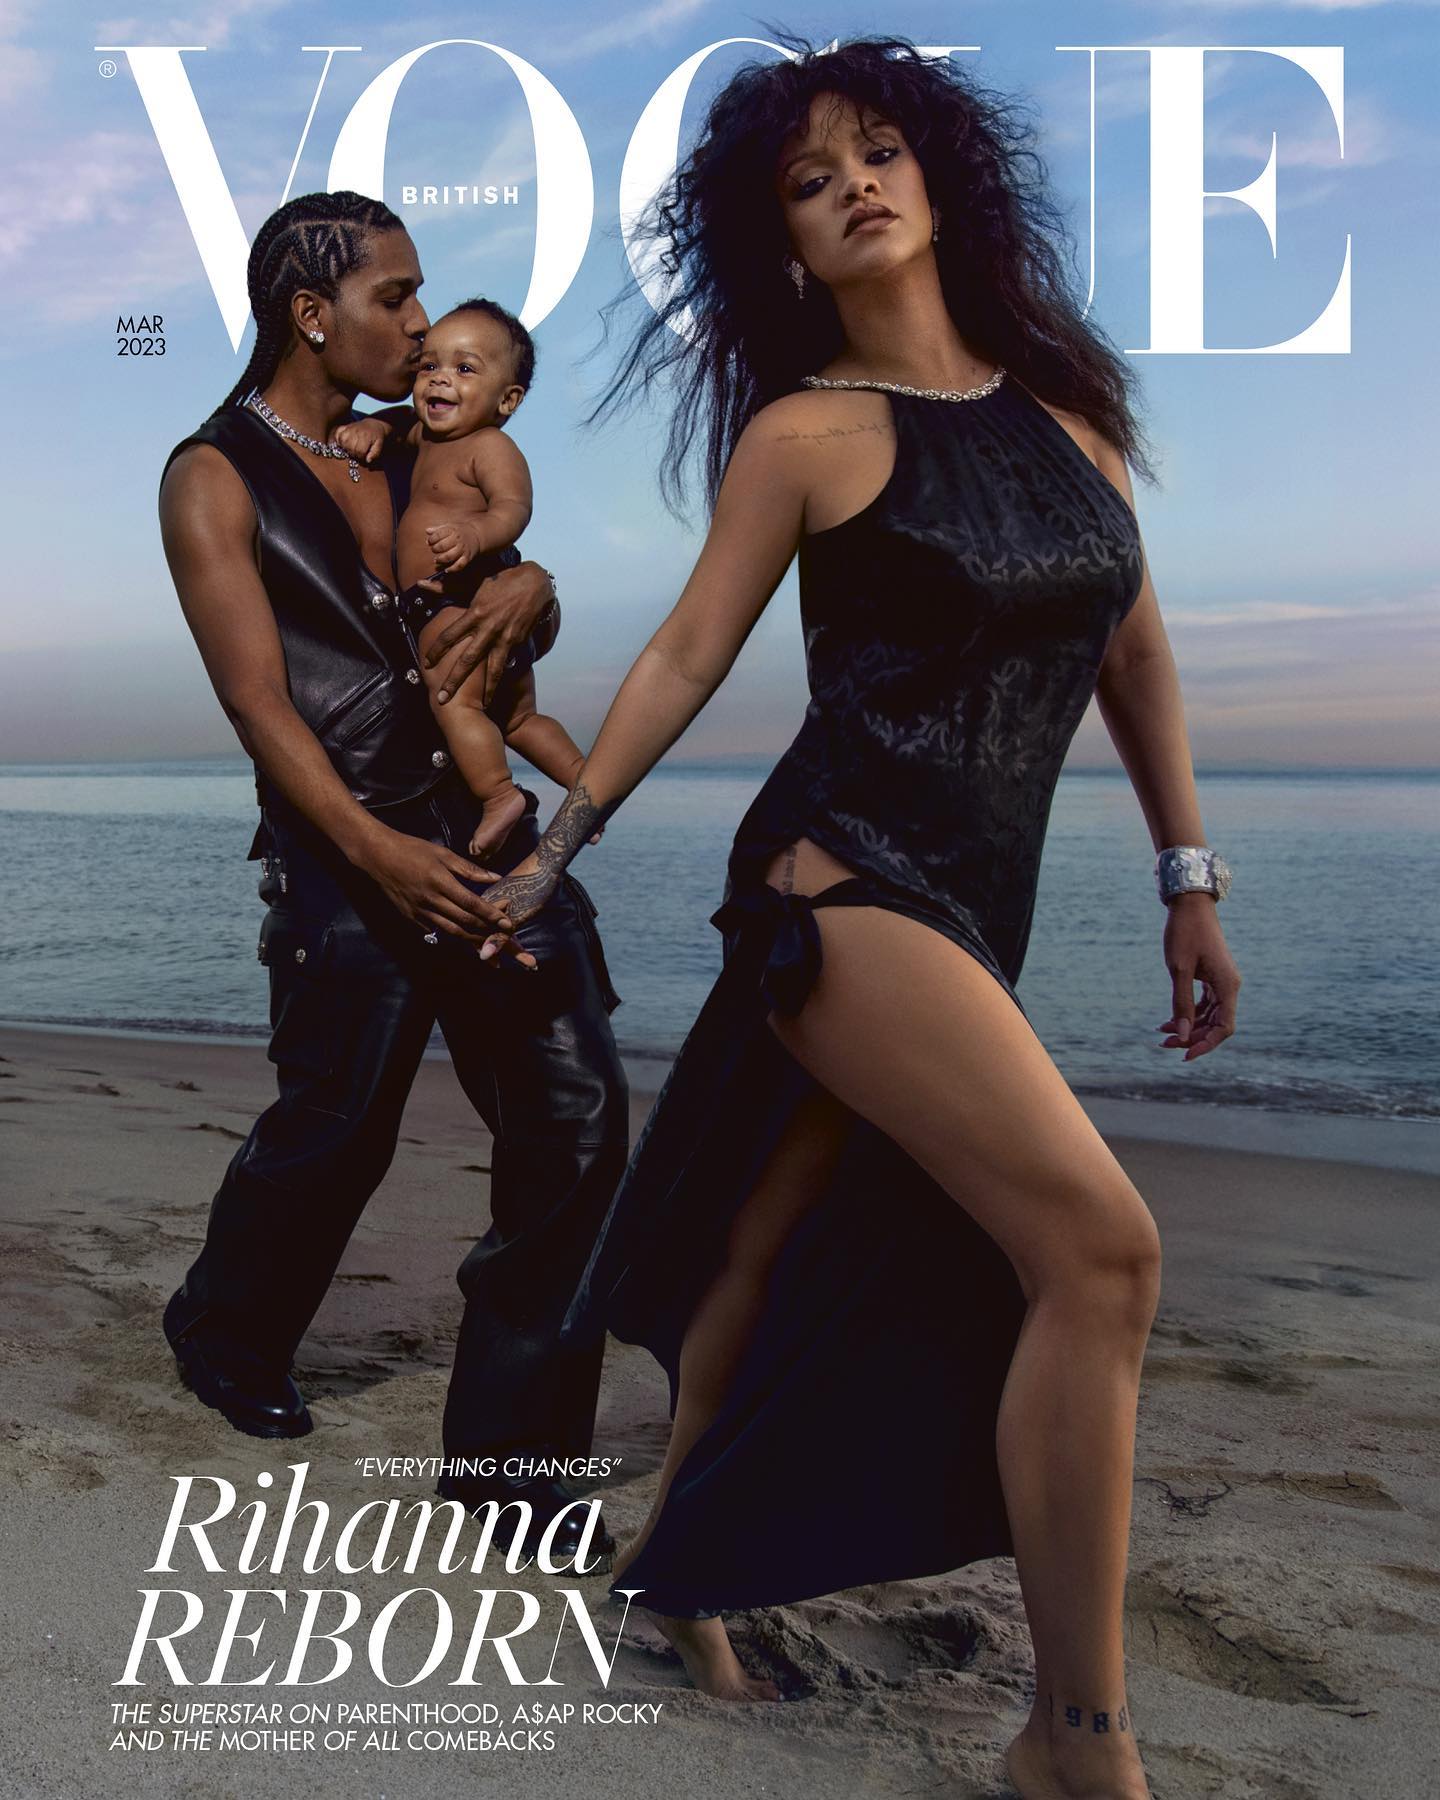 rihanna's son photos with asap rocky british vogue cover march 2023